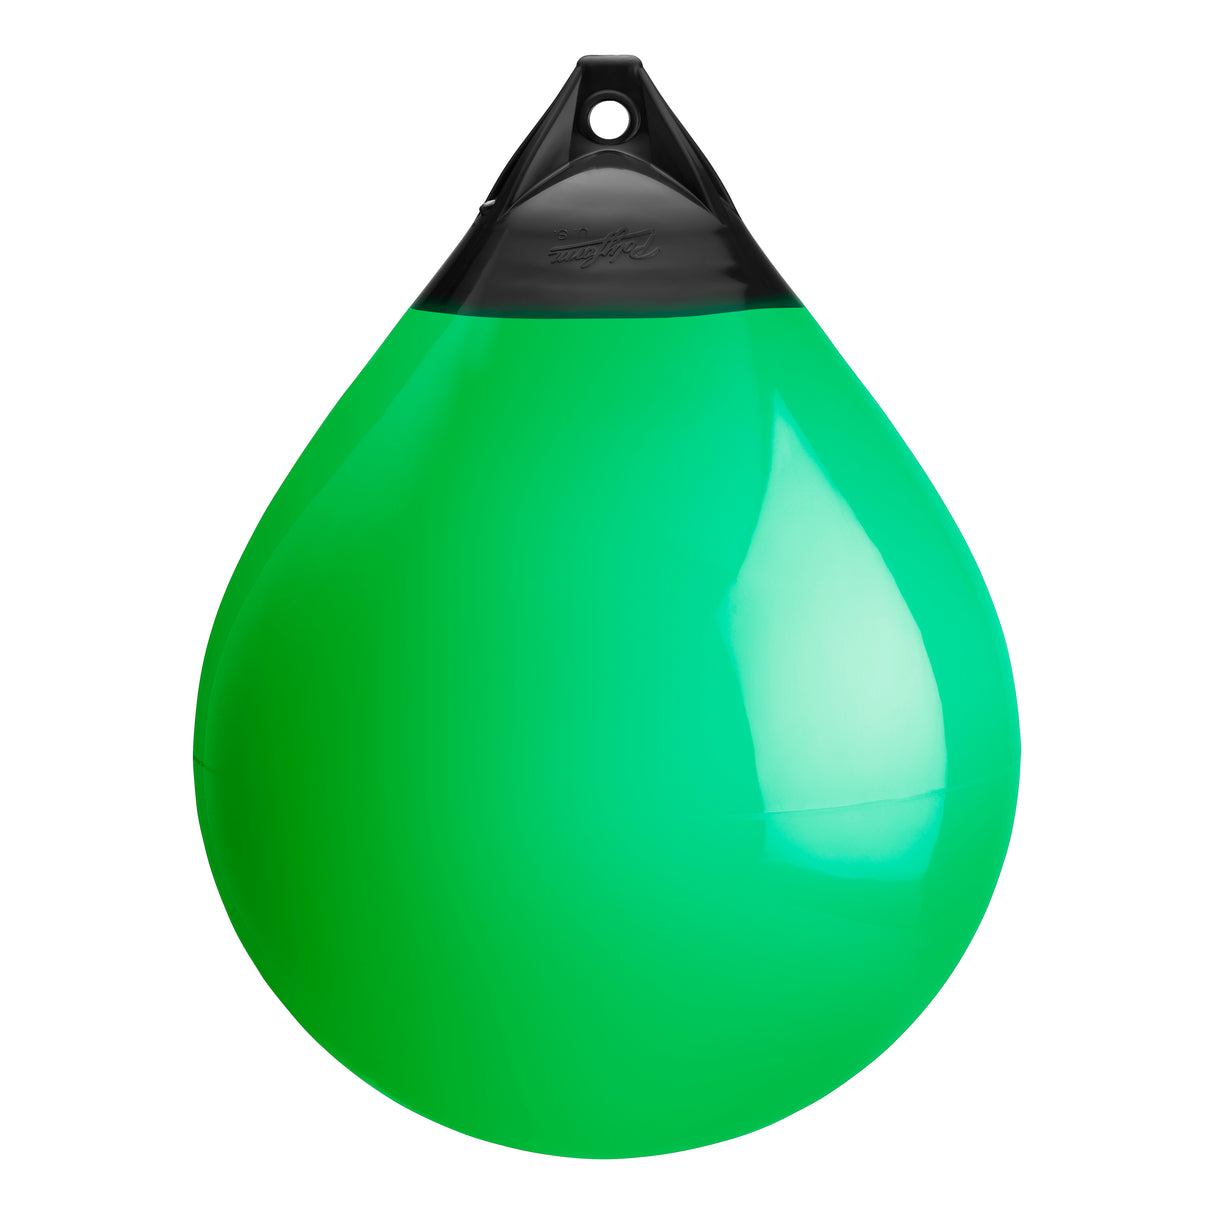 Green buoy with Black-Top, Polyform A-6